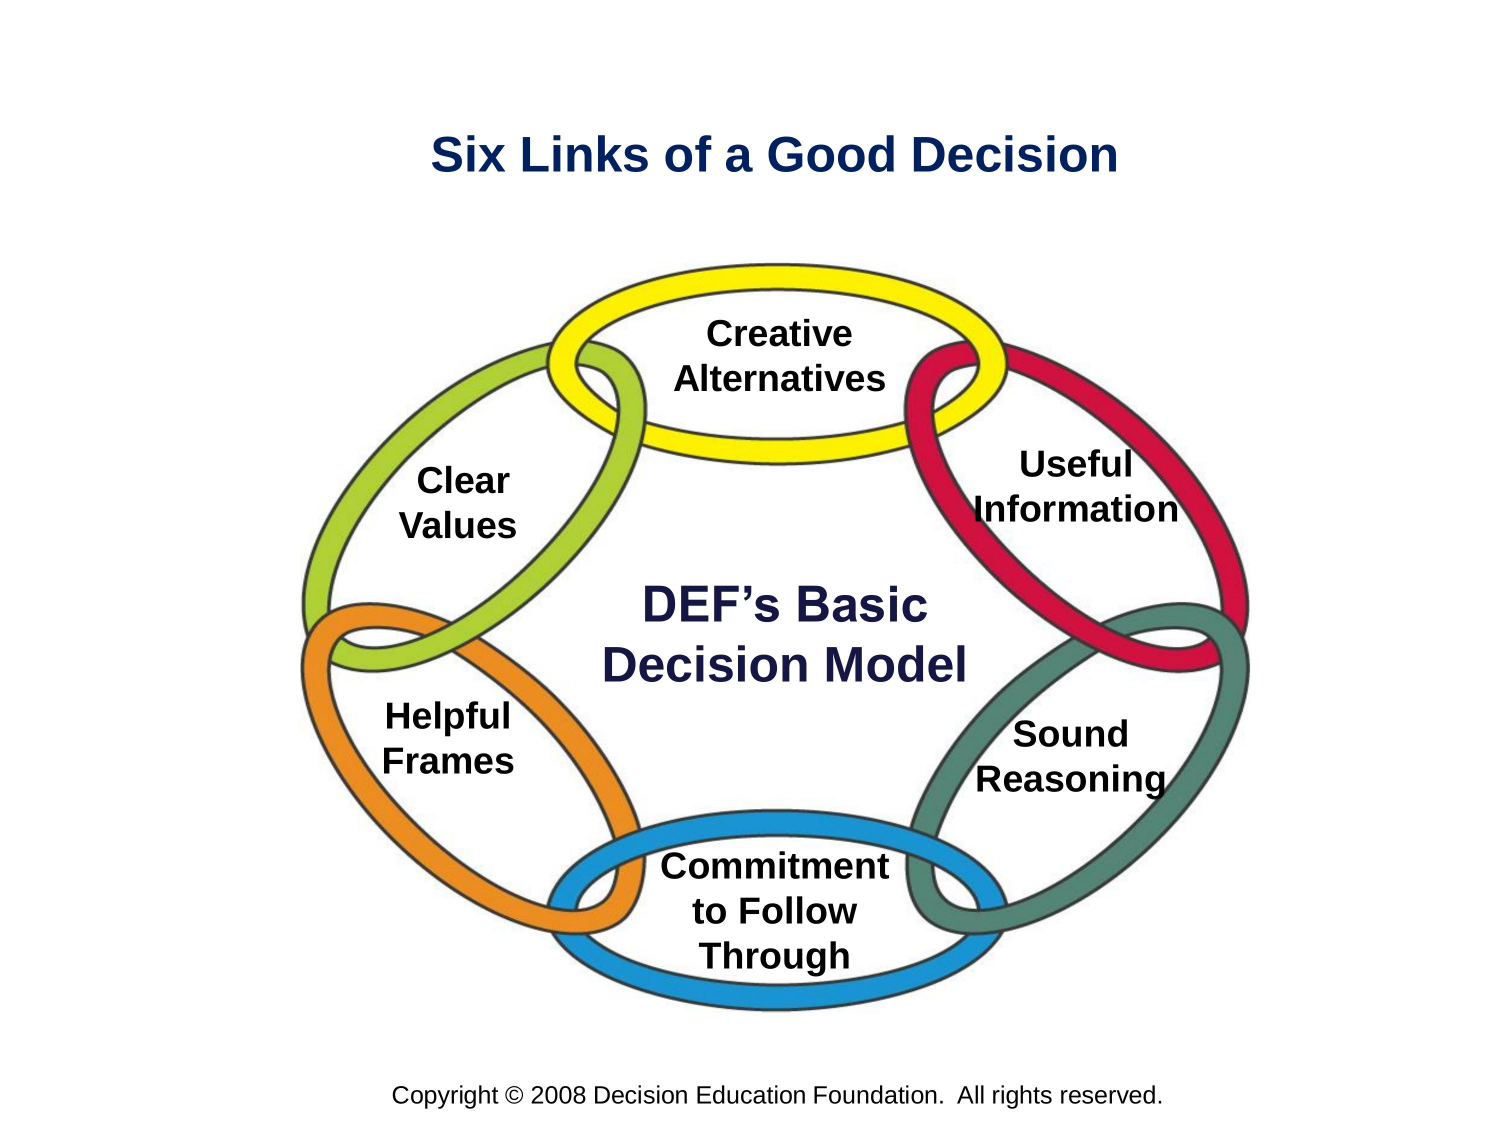 Six Links of a Good Decision